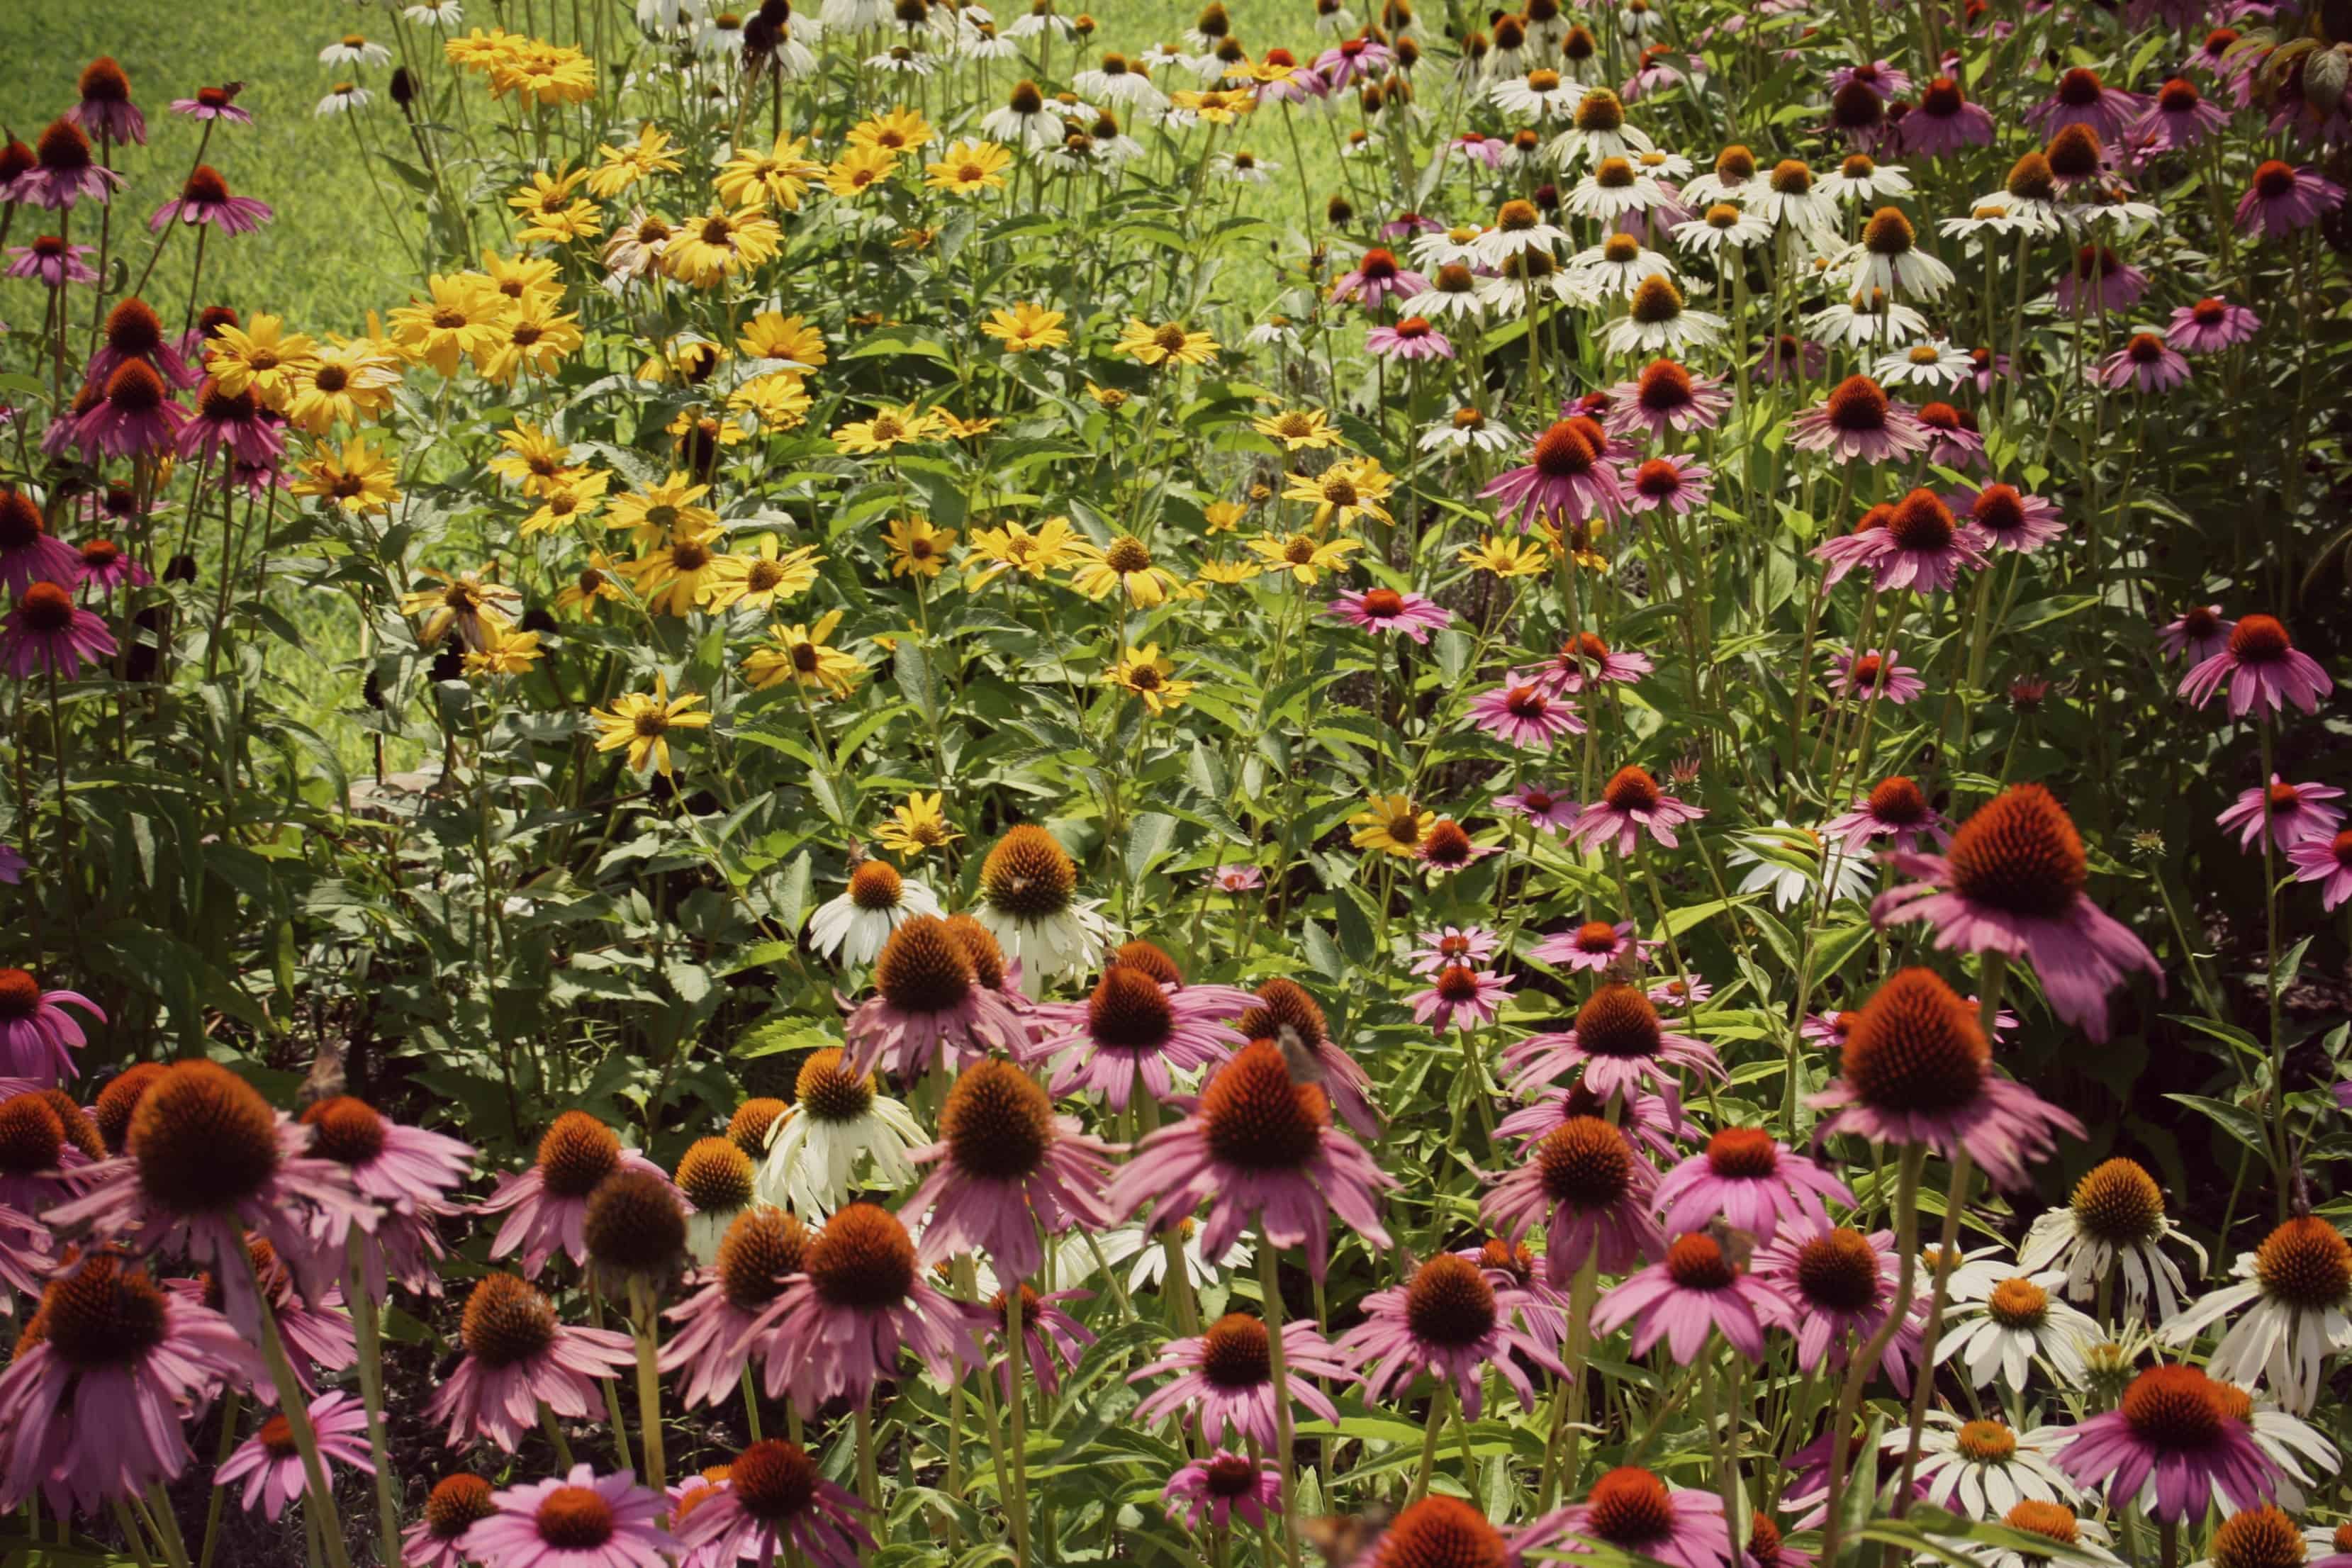 A field of coneflowers!